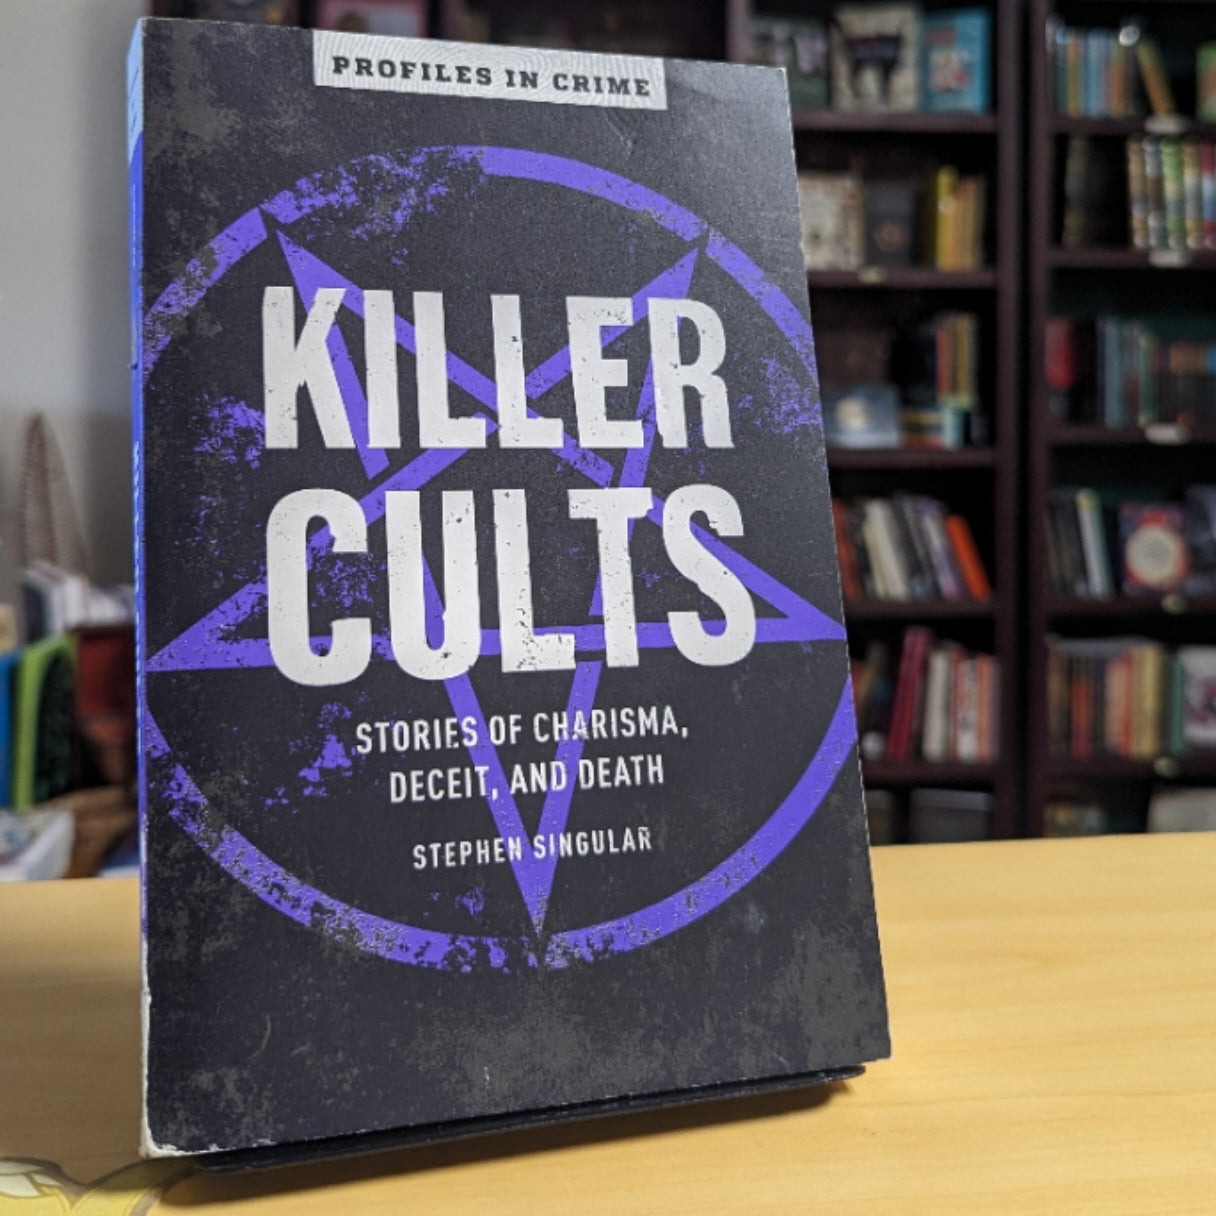 Killer Cults: Stories of Charisma, Deceit, and Death (Volume 3) (Profiles in Crime)